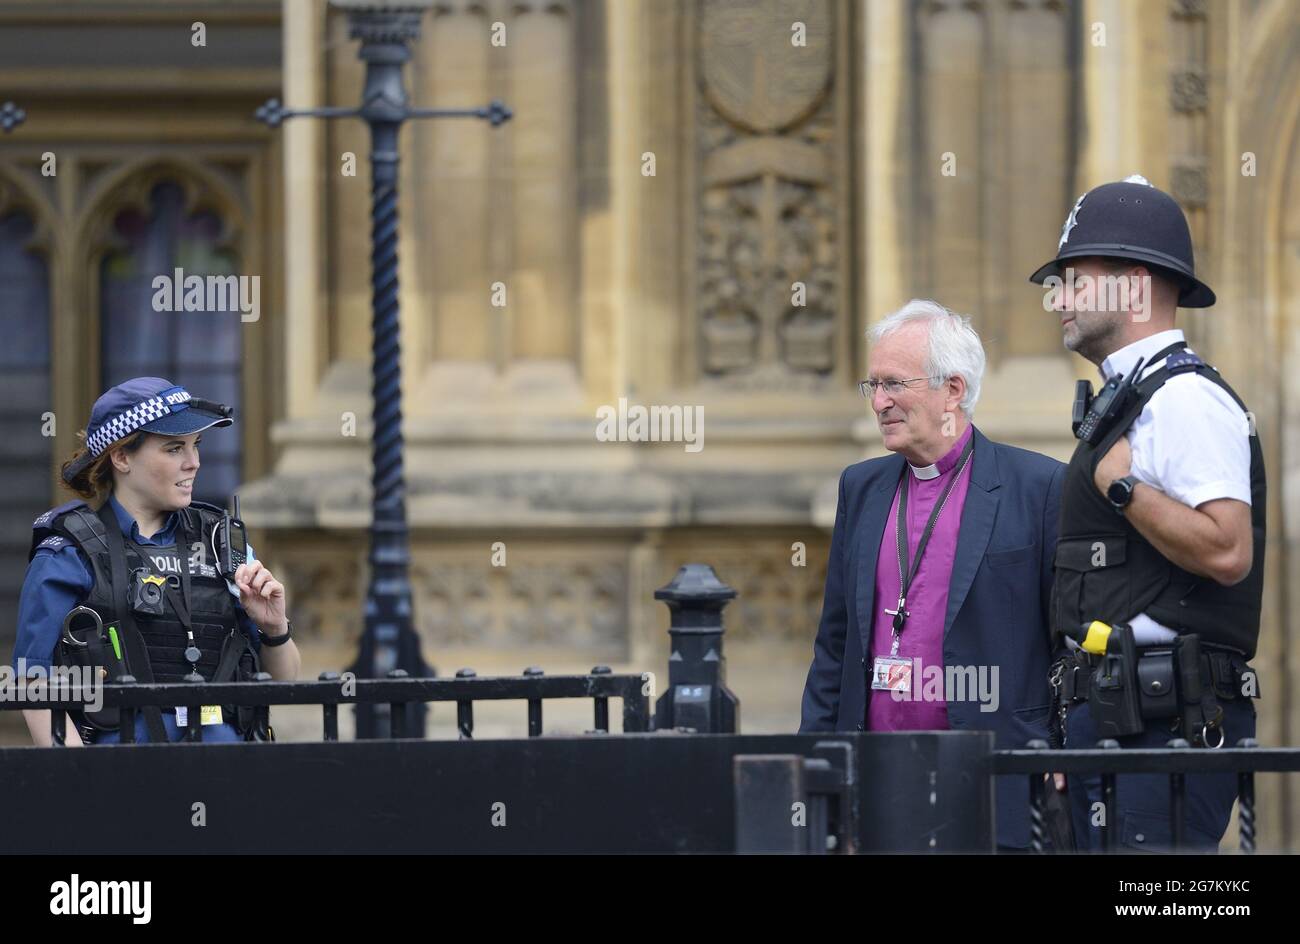 The Right Reverend David Urquhart, Bishop of Birmingham, talking to police officers outside the Houses of Parliament, Westminster, London Stock Photo